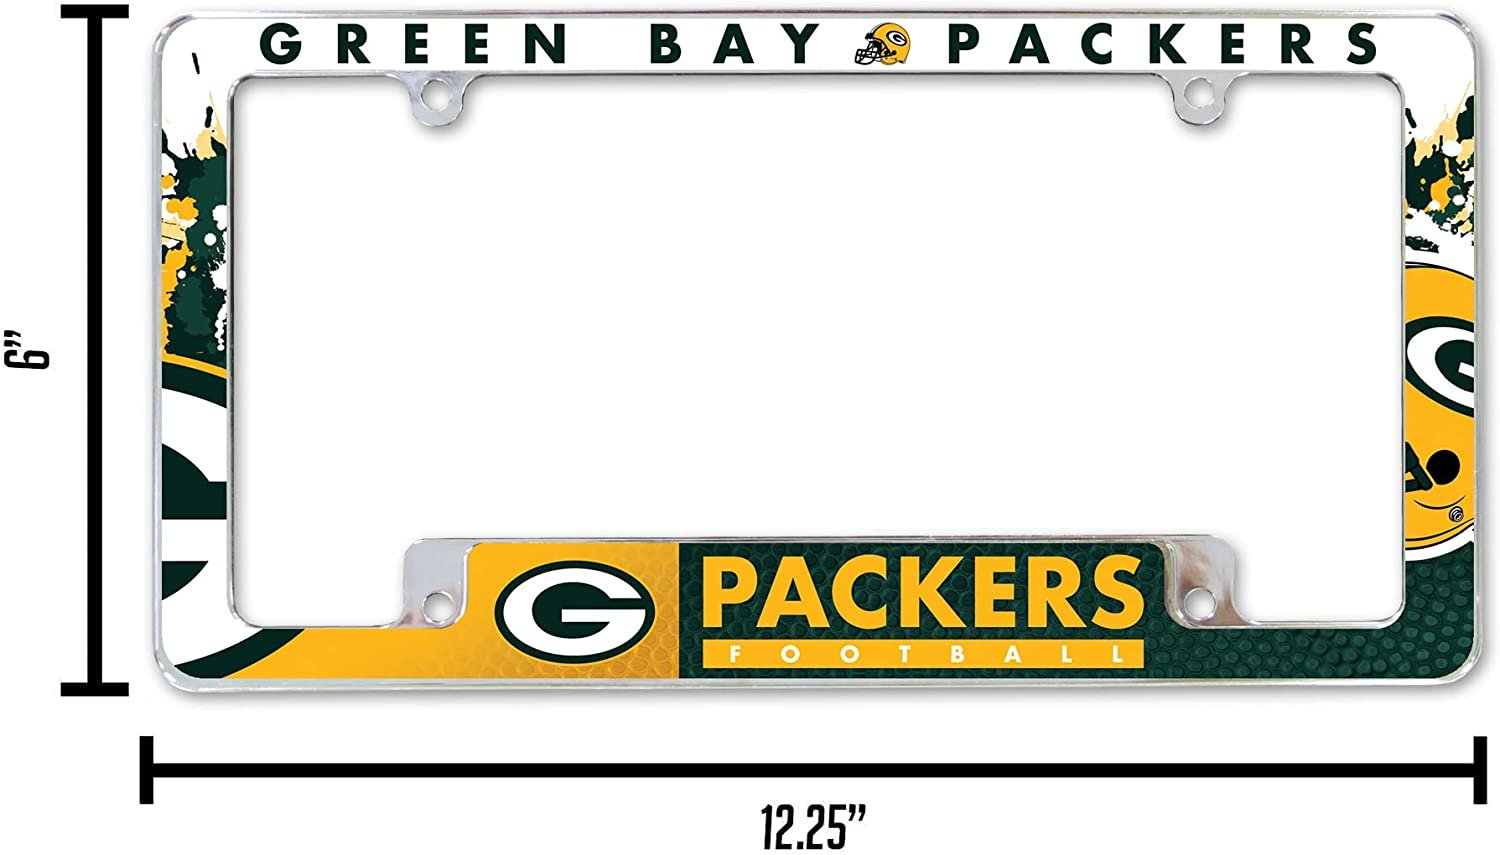 Green Bay Packers Metal License Plate Frame Chrome Tag Cover All Over Design 6x12 Inch